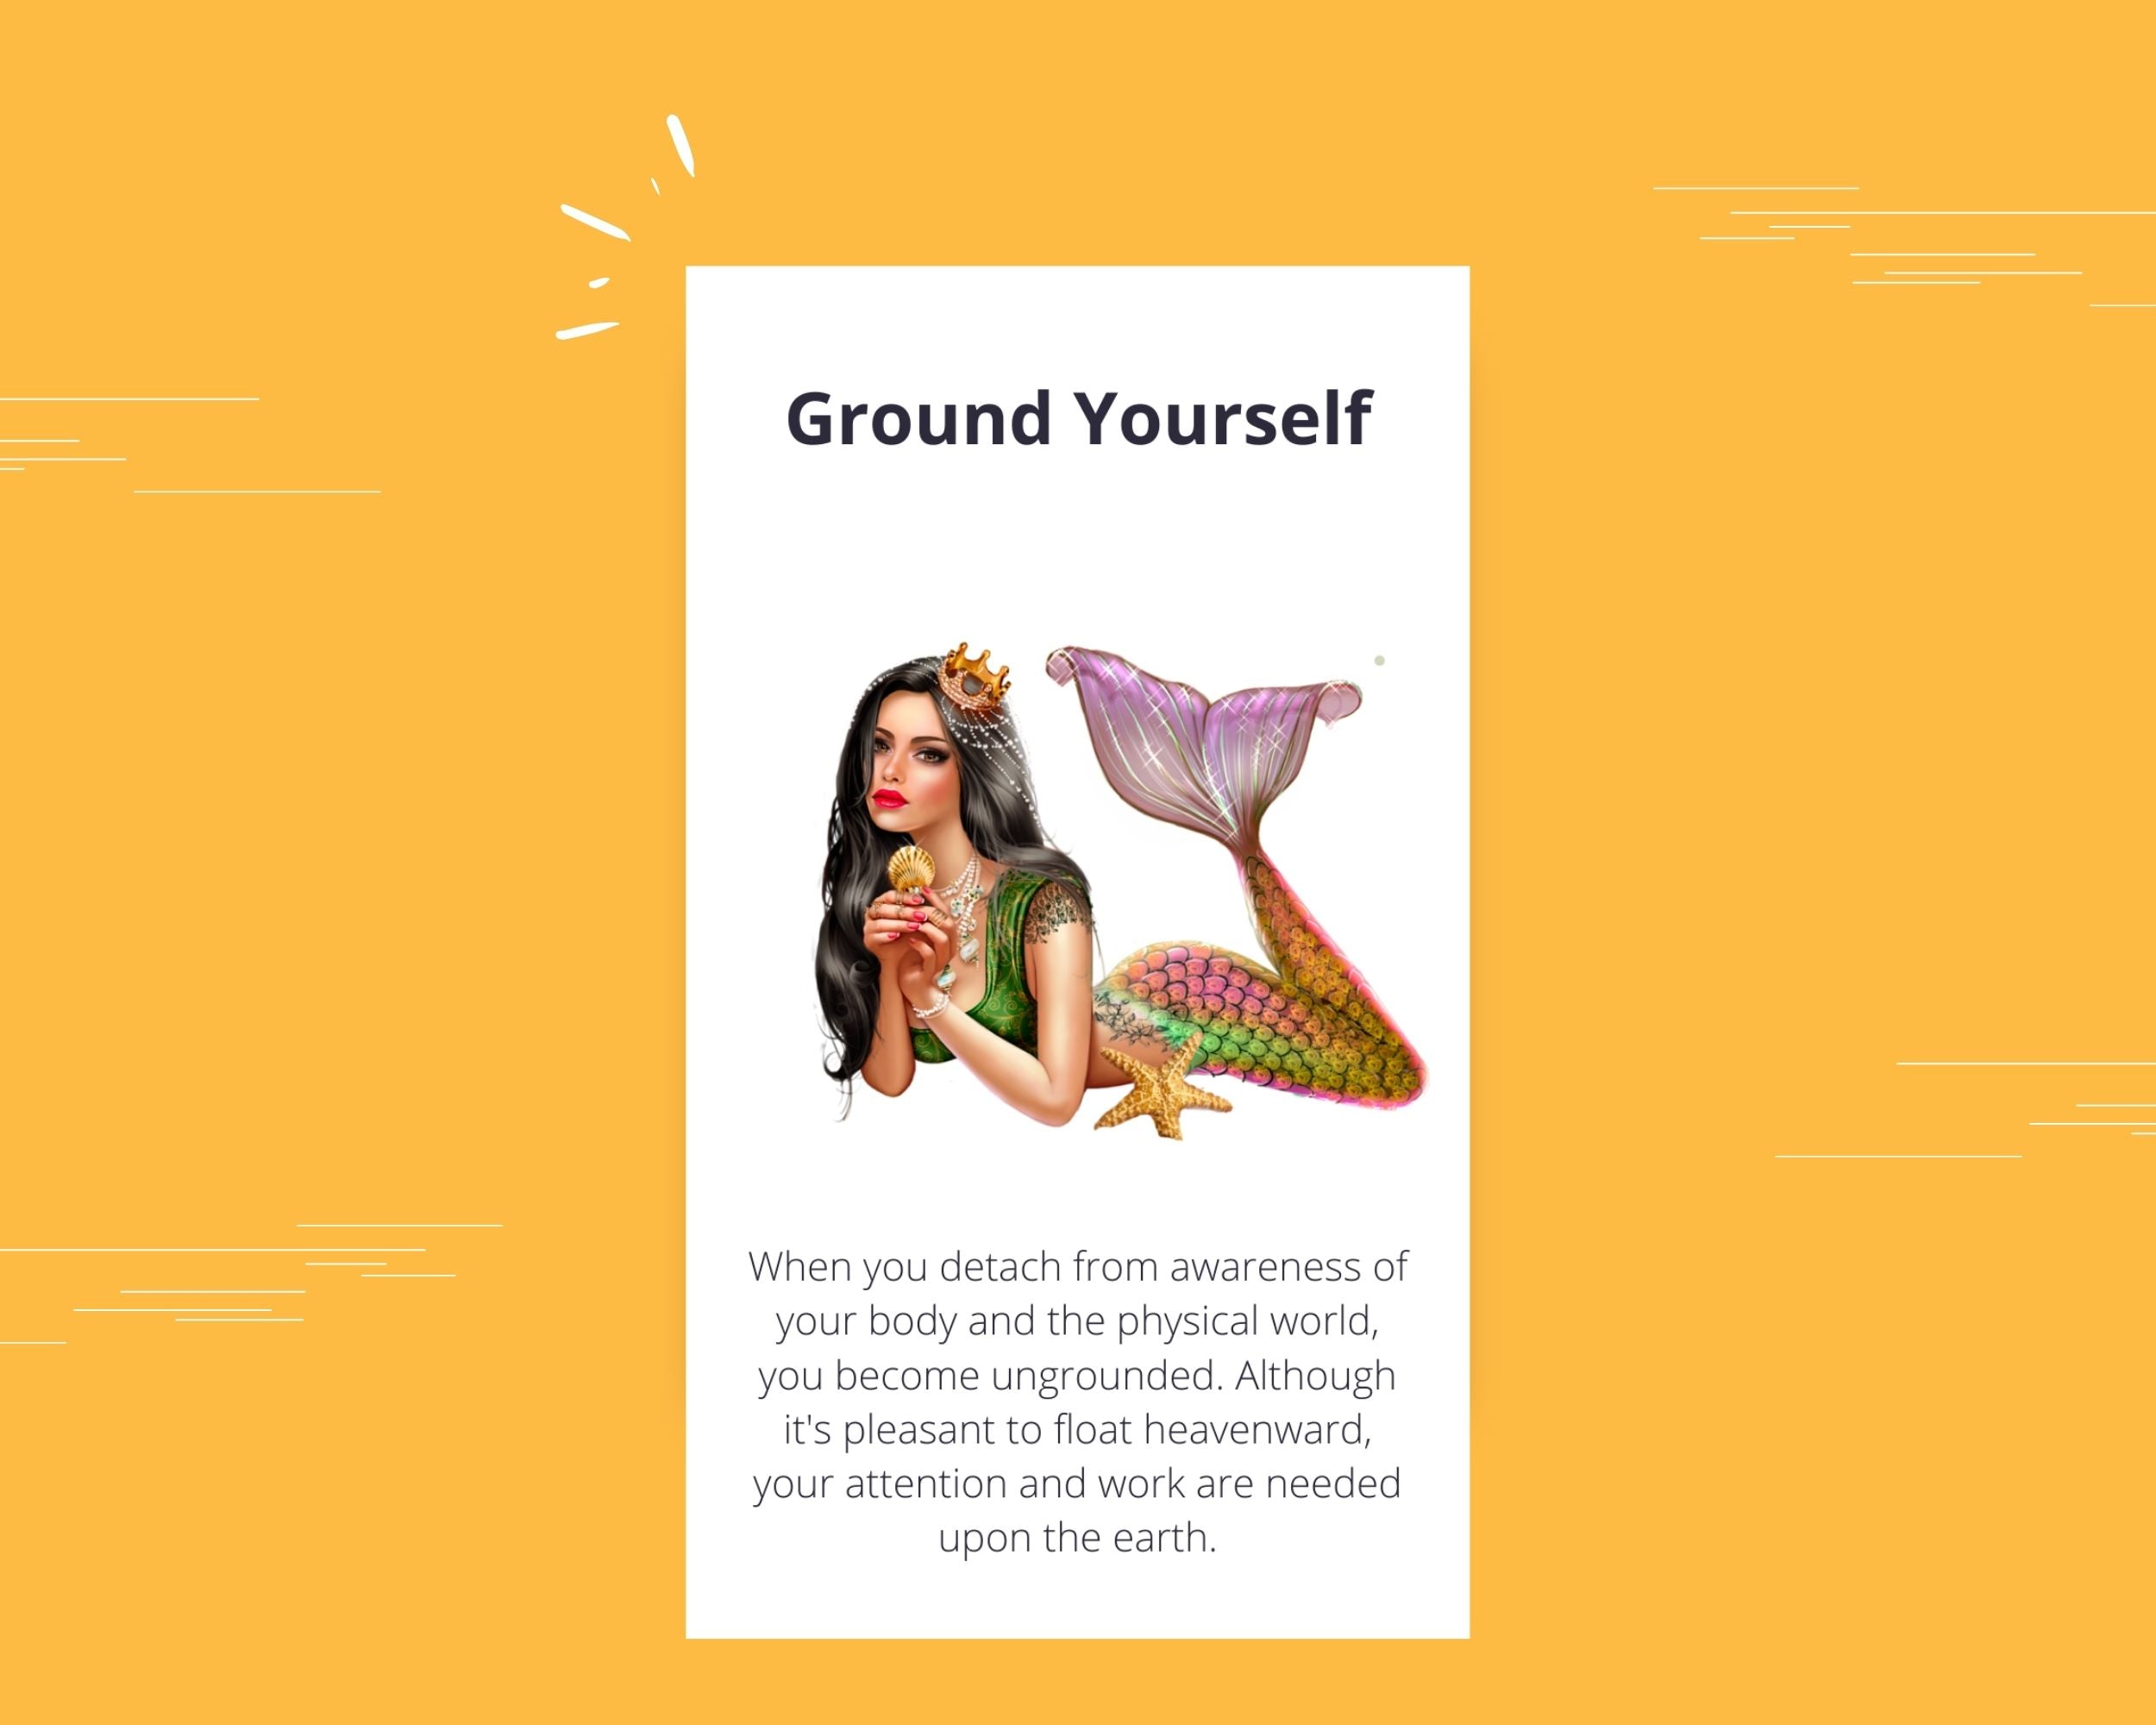 Self Love Mermaid Messages Oracle Card Deck | Editable 44 Card Deck in Canva | Size 2.75"x 4.75" | Commercial Use